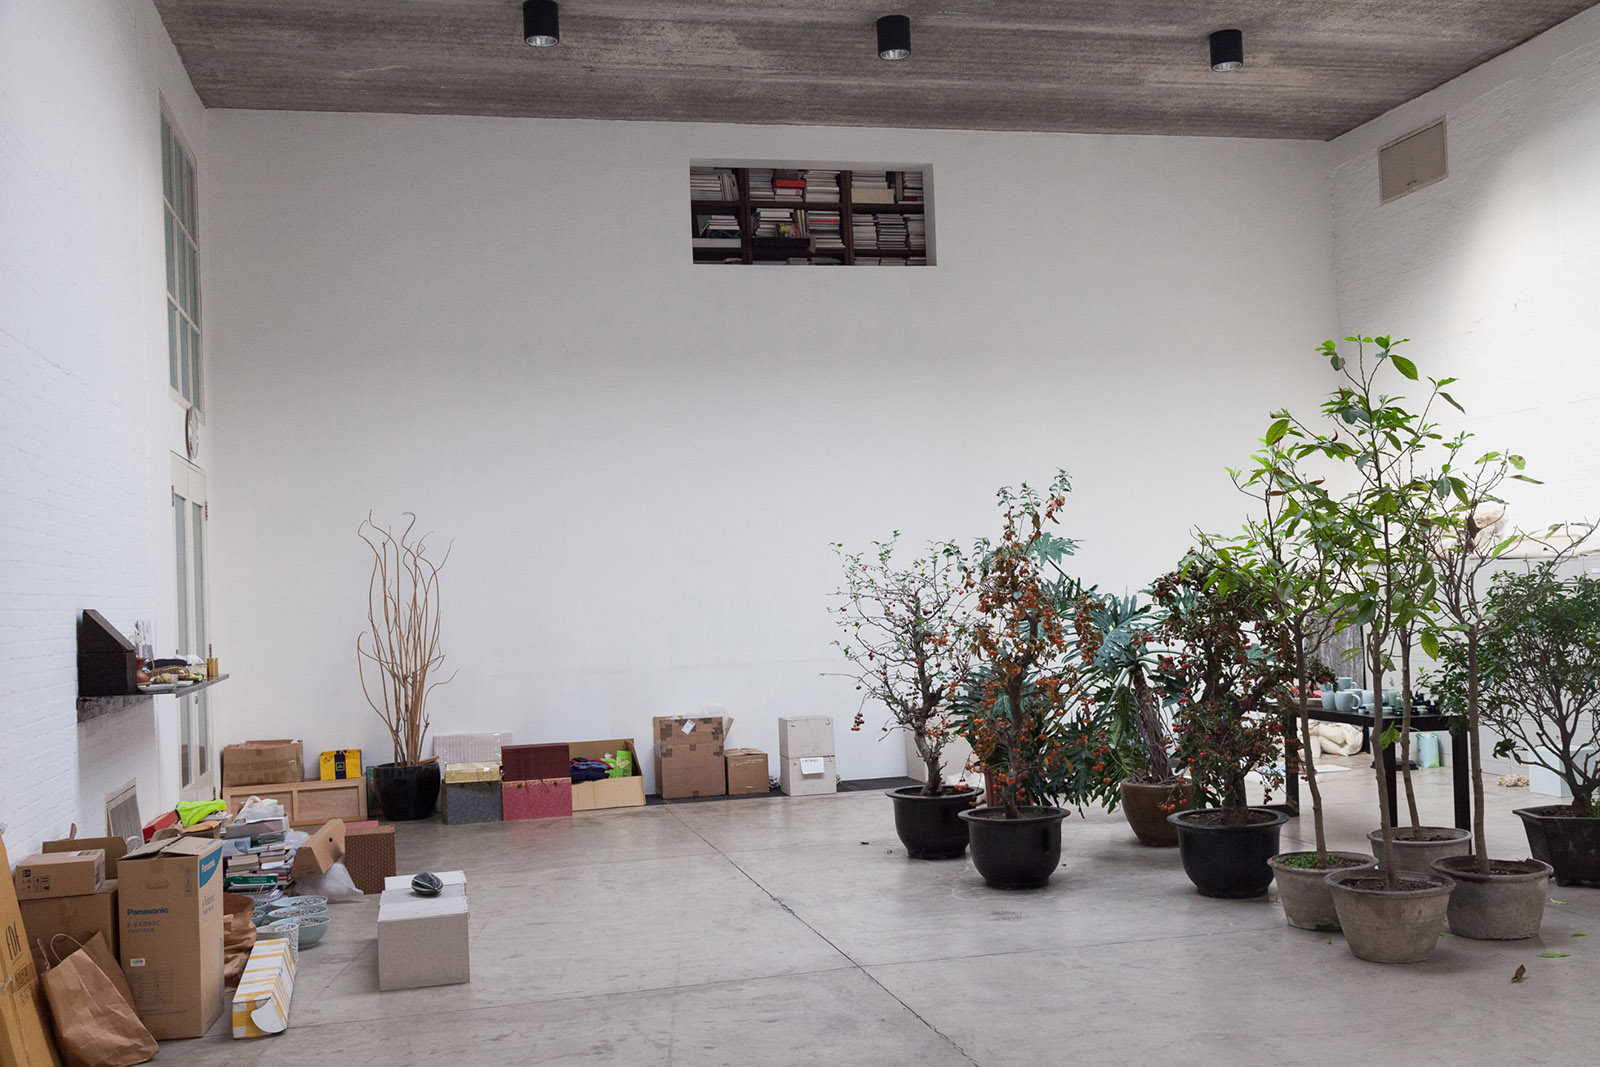 Art studio space with artworks, plants and books